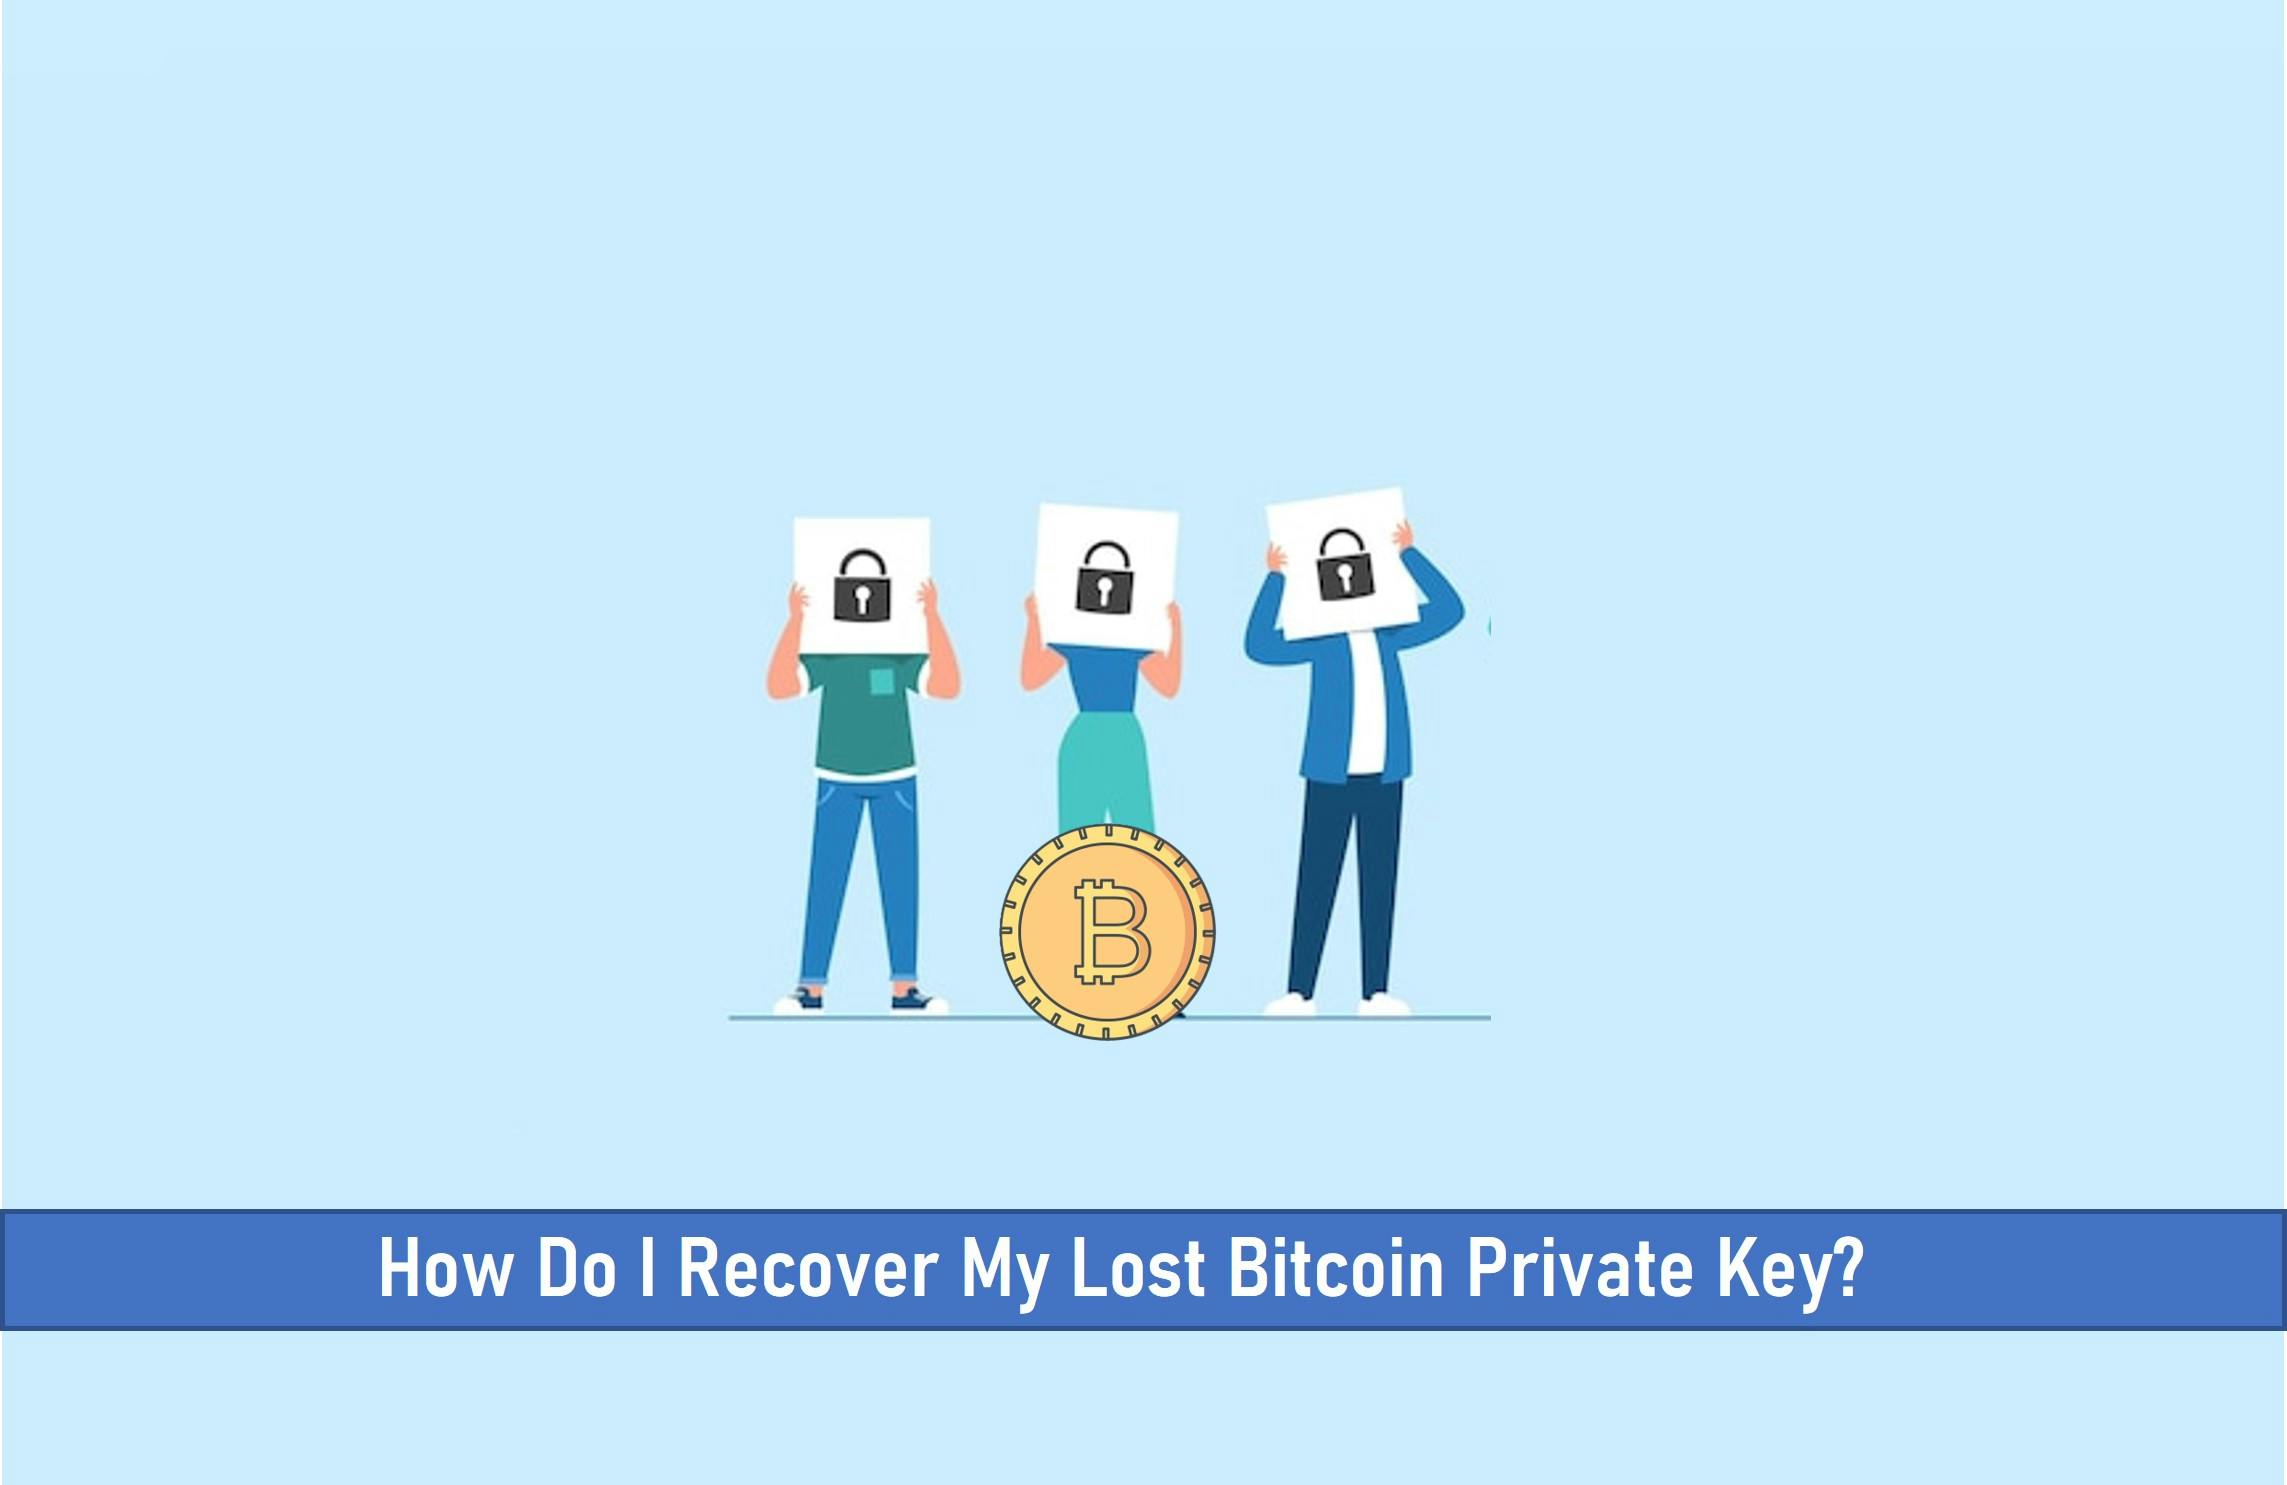 How Do I Recover My Lost Bitcoin Private Key?